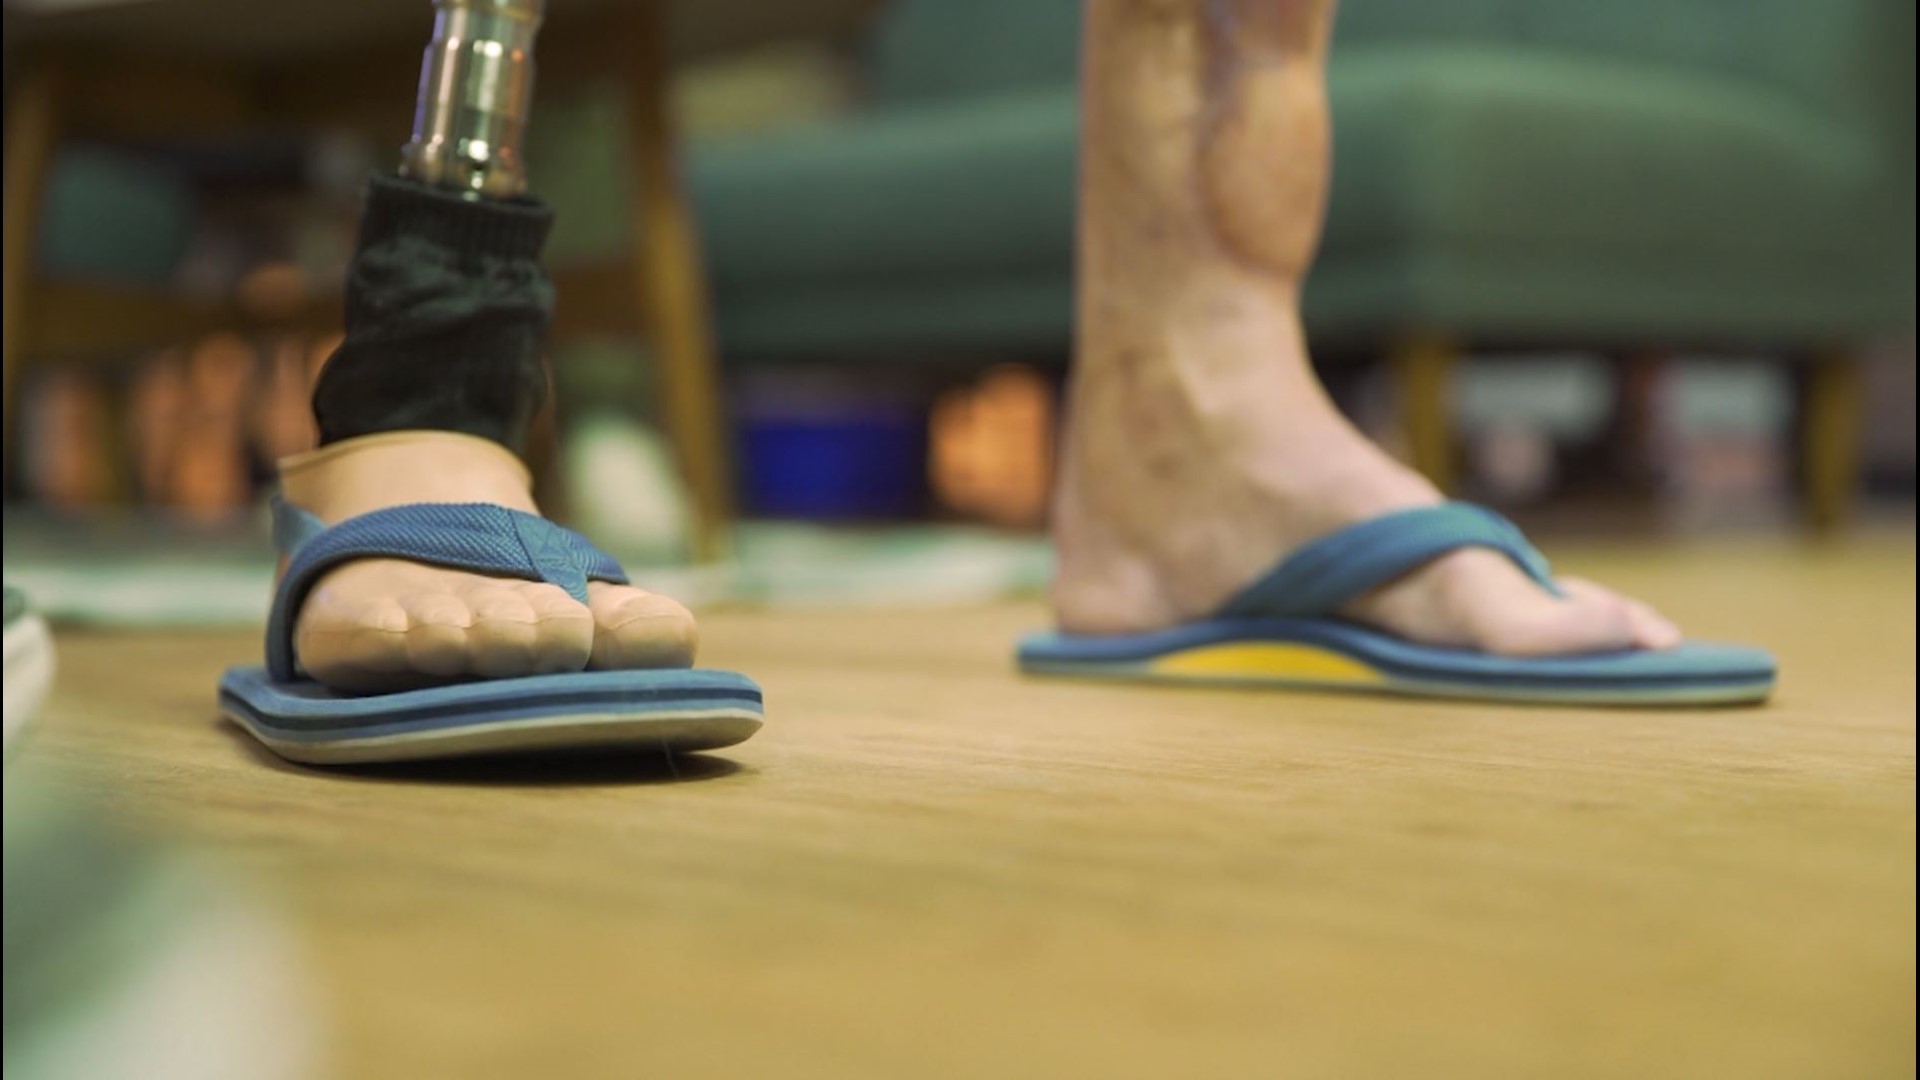 Marine veteran and amputee Jacob Schick explains why a simple pair of flip flops, now offered free to veterans just like him, is a bigger deal than you might think.